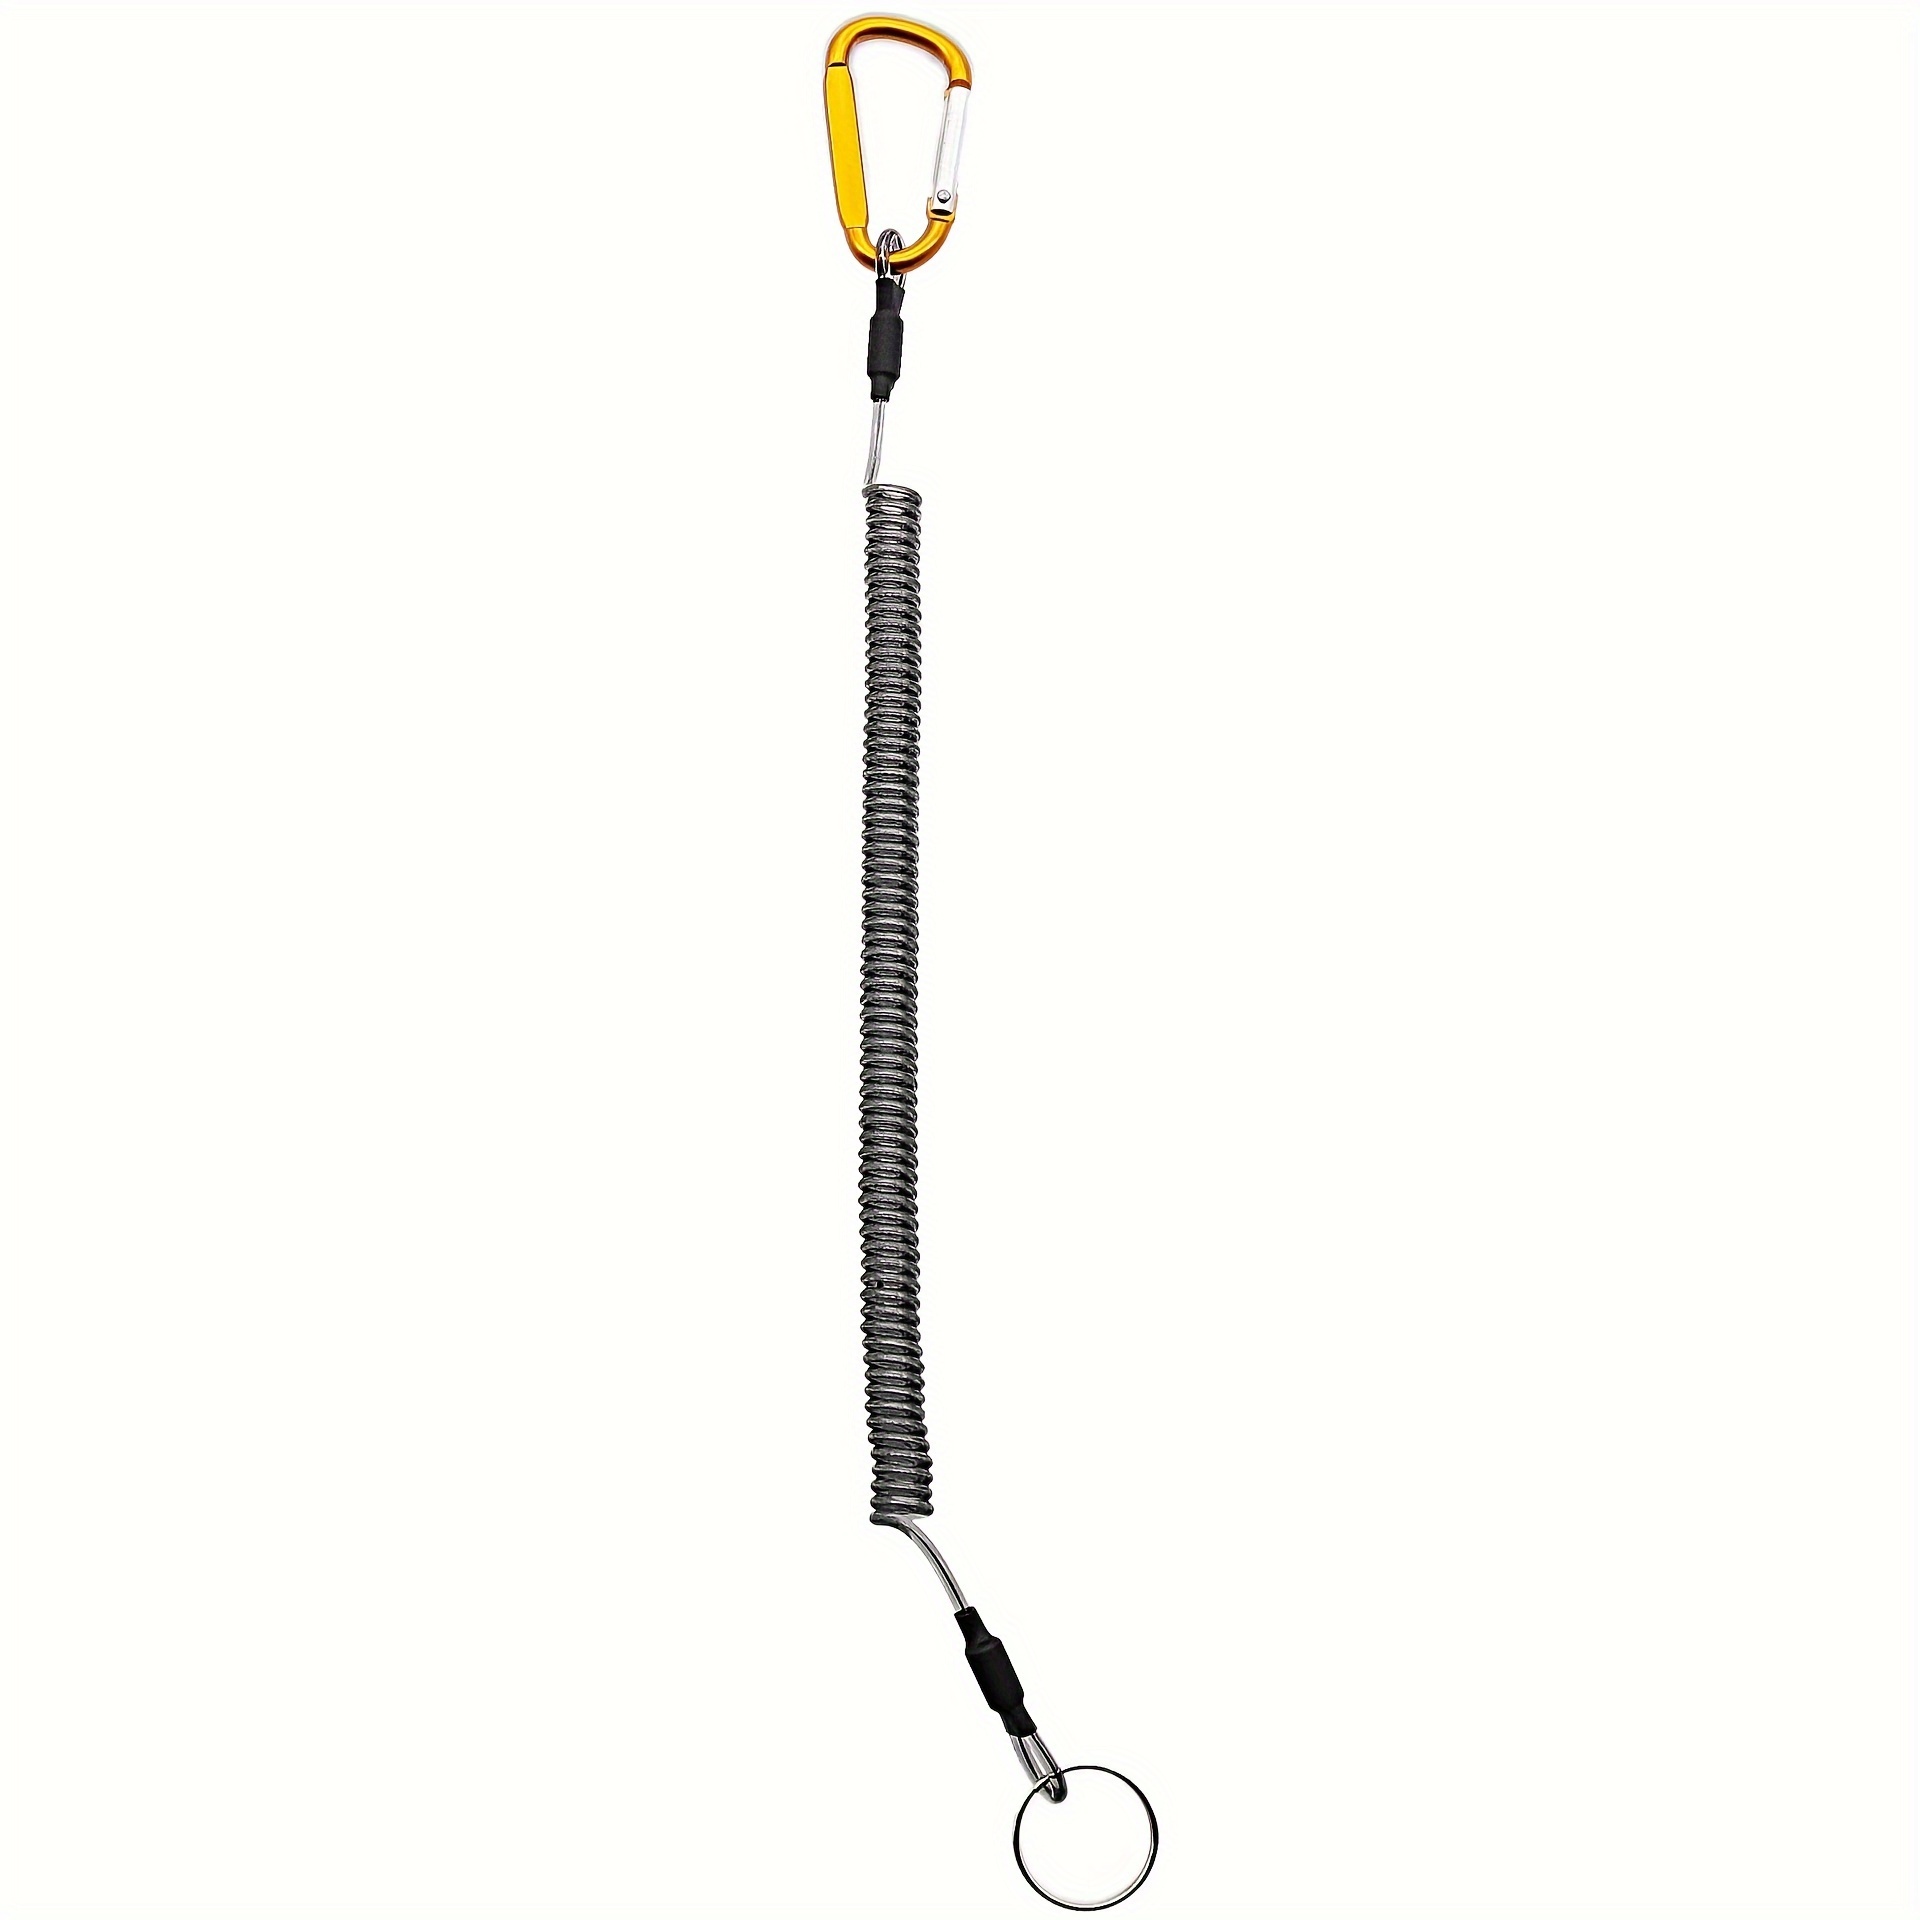  Retractable Fishing Lanyards with Safety Spring Coiled